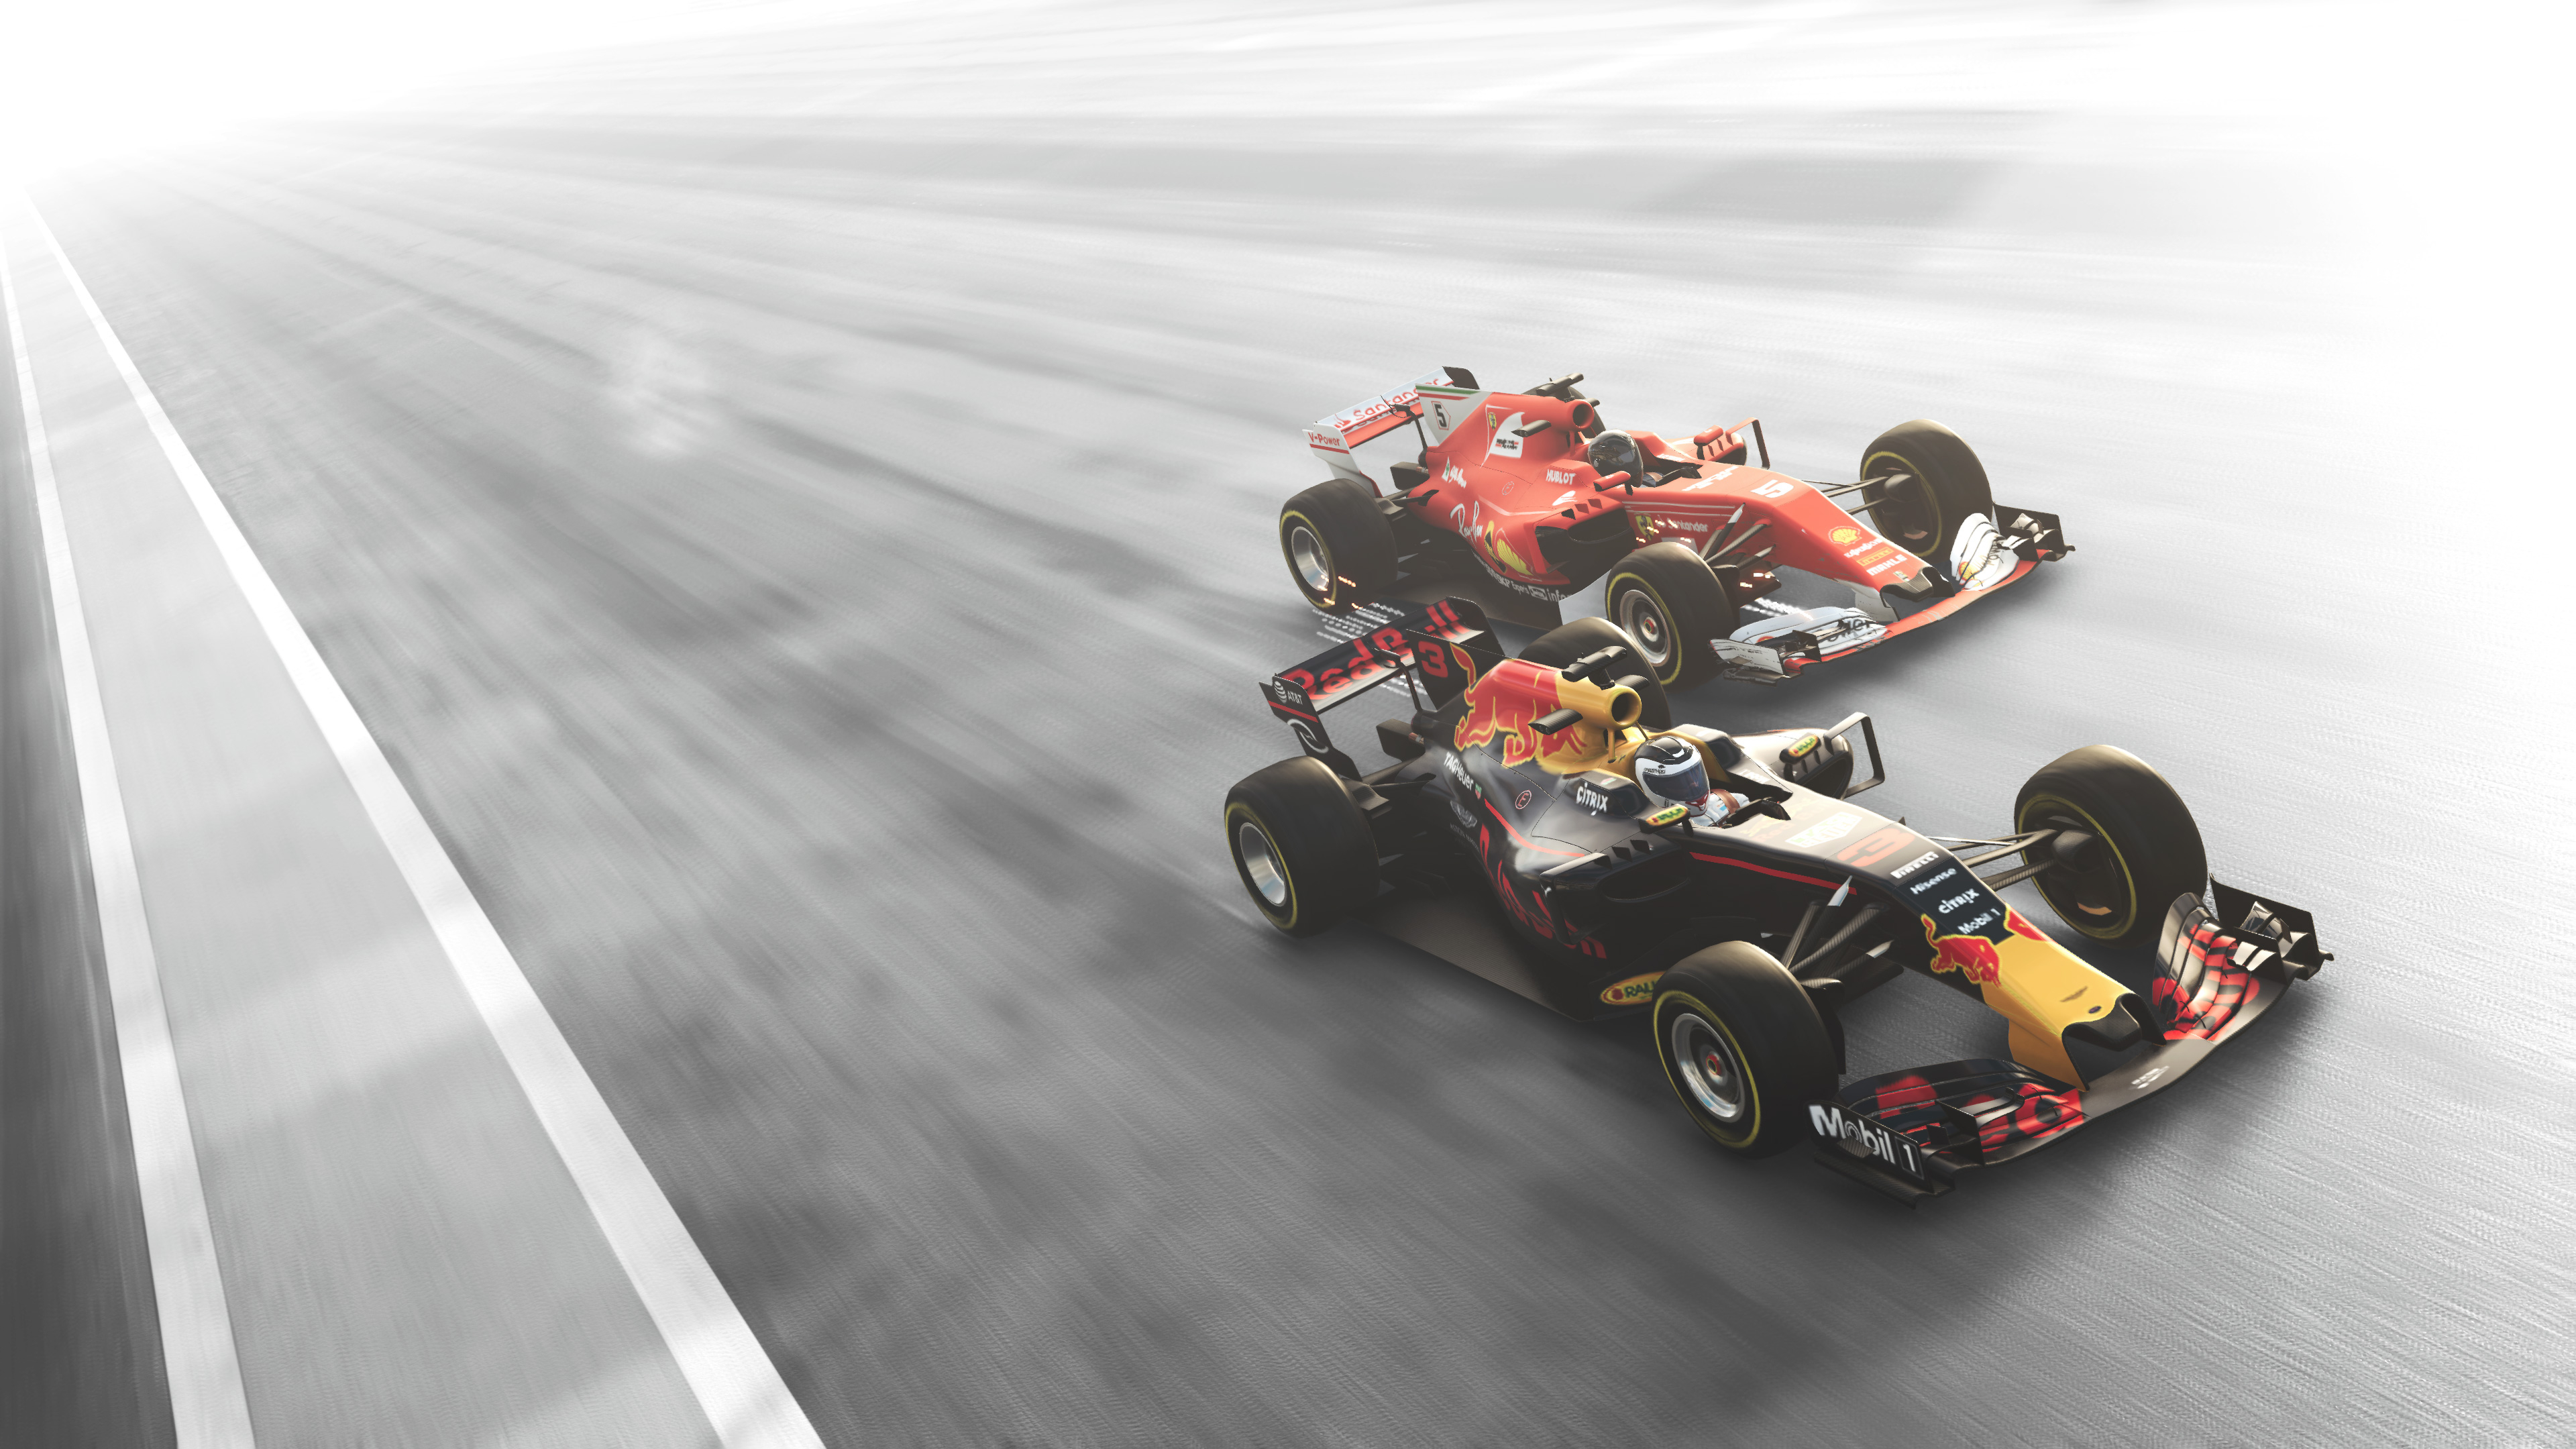 3840x2160 1600x1200 The Crew 2 Red Bull F1 Cars 4k 1600x1200 Resolution HD 4k Wallpapers, Images, Backgrounds, Photos and Pictures